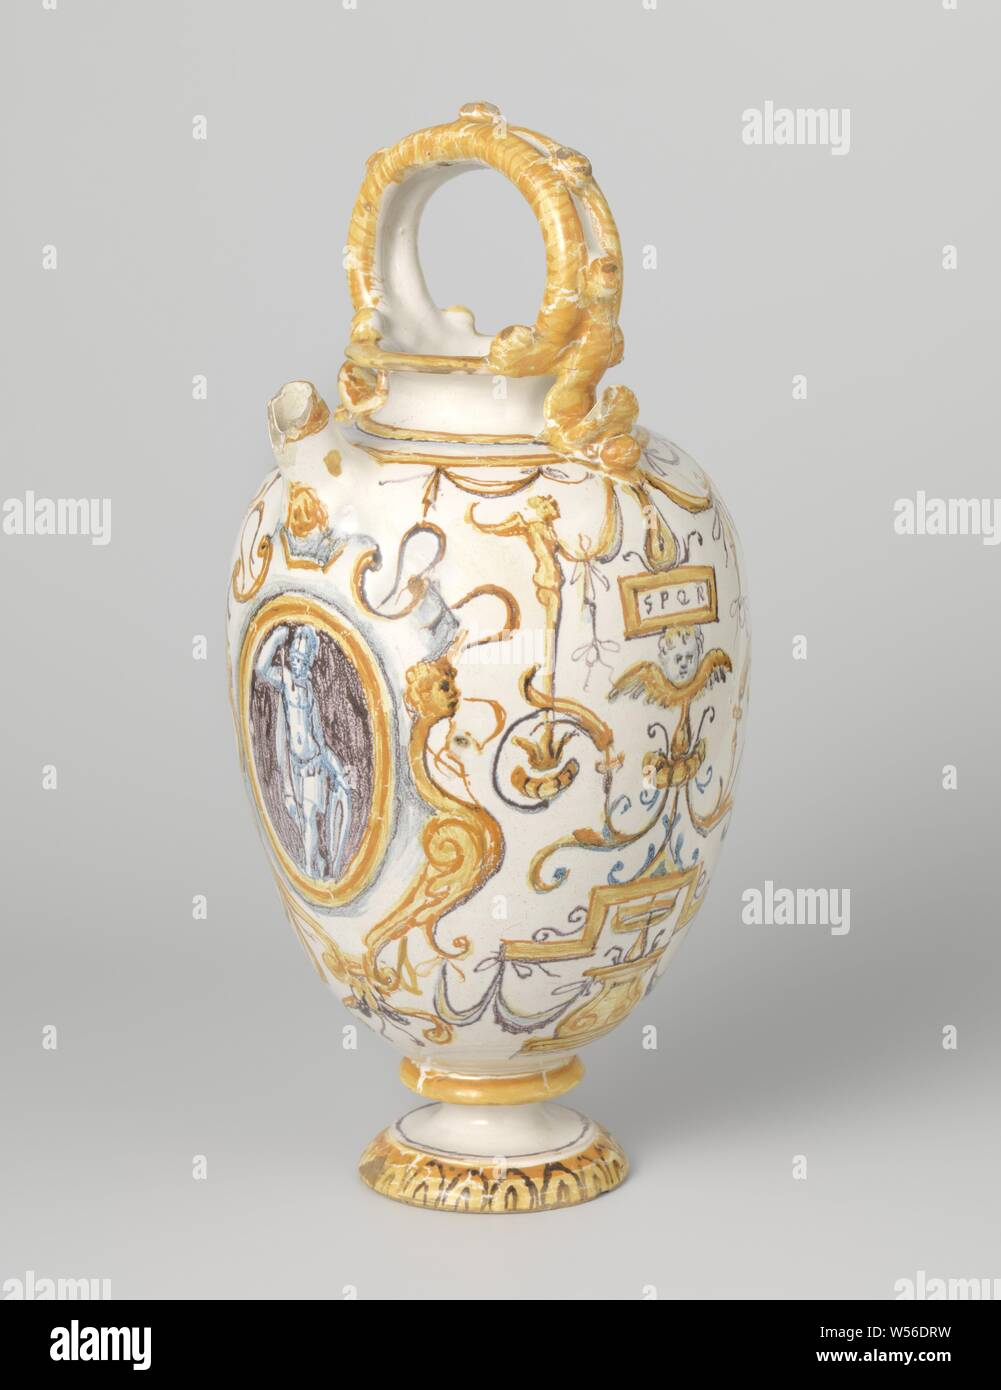 Vase, decorated with warriors in cartouche and SPQR inscription, Vase of multi-colored majolica. The inverted egg-shaped vase stands on a profiled foot. A standing ear is attached to the short neck. A cartouche is painted under the spout, inside of which a warrior with shield and spear. A cartouche has been painted on the other side, within which a warrior with sword and raised right arm. The letters SPQR are painted within two cartouches., anonymous, Urbino, c. 1580 - c. 1640, earthenware, tin glaze, lead glaze, h 29.0 cm × d 13.0 cm Stock Photo